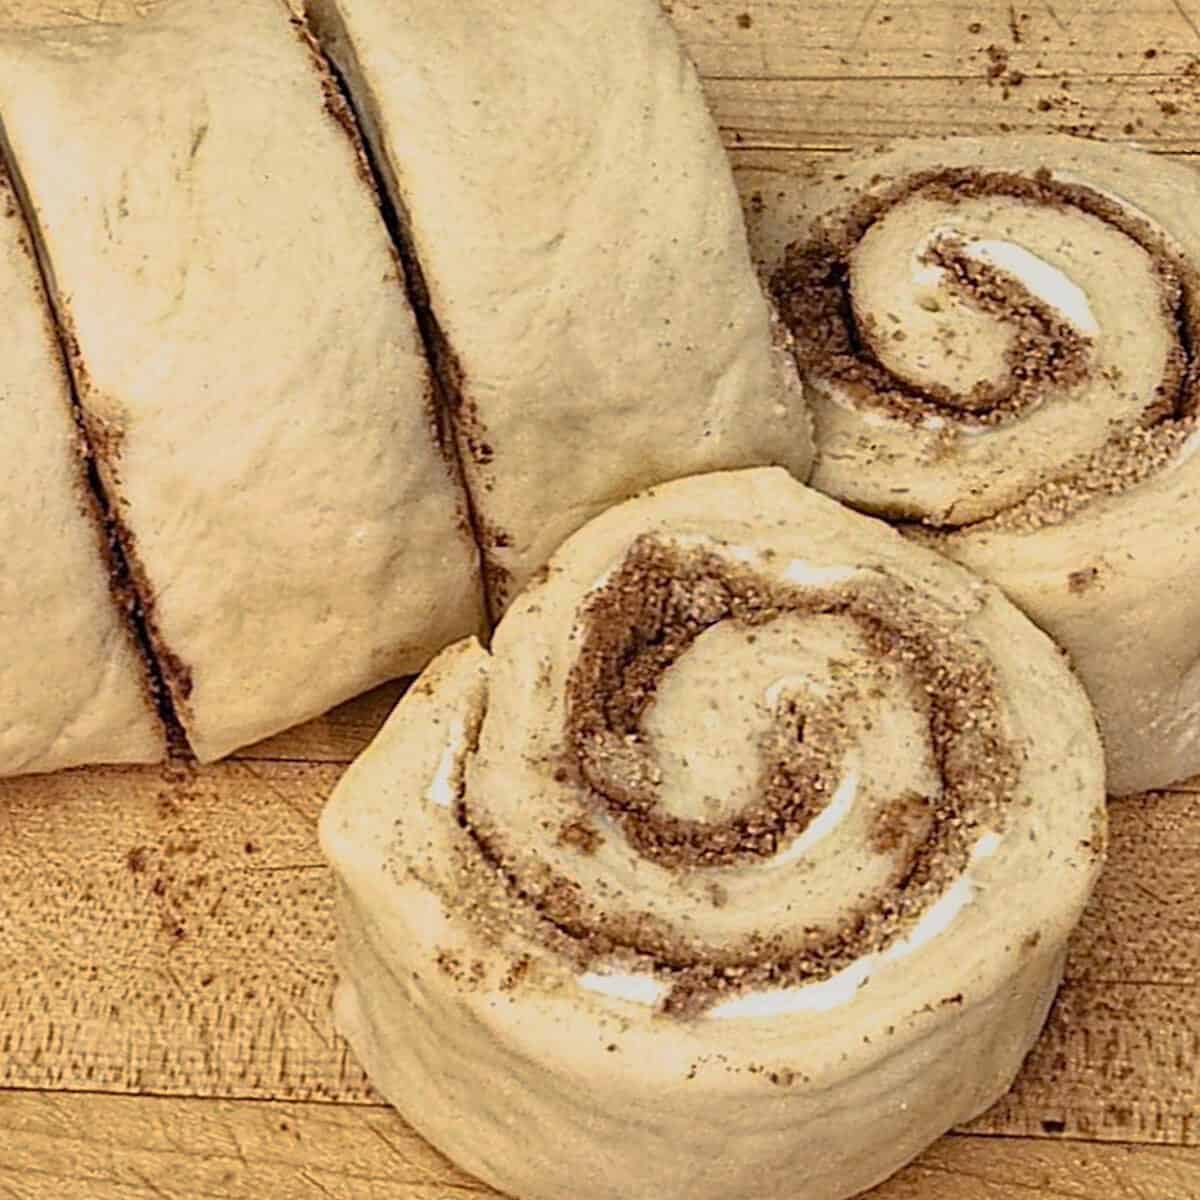 uncooked cinnamon roll dough shown in a log that has been sliced into pinwheel pieces.